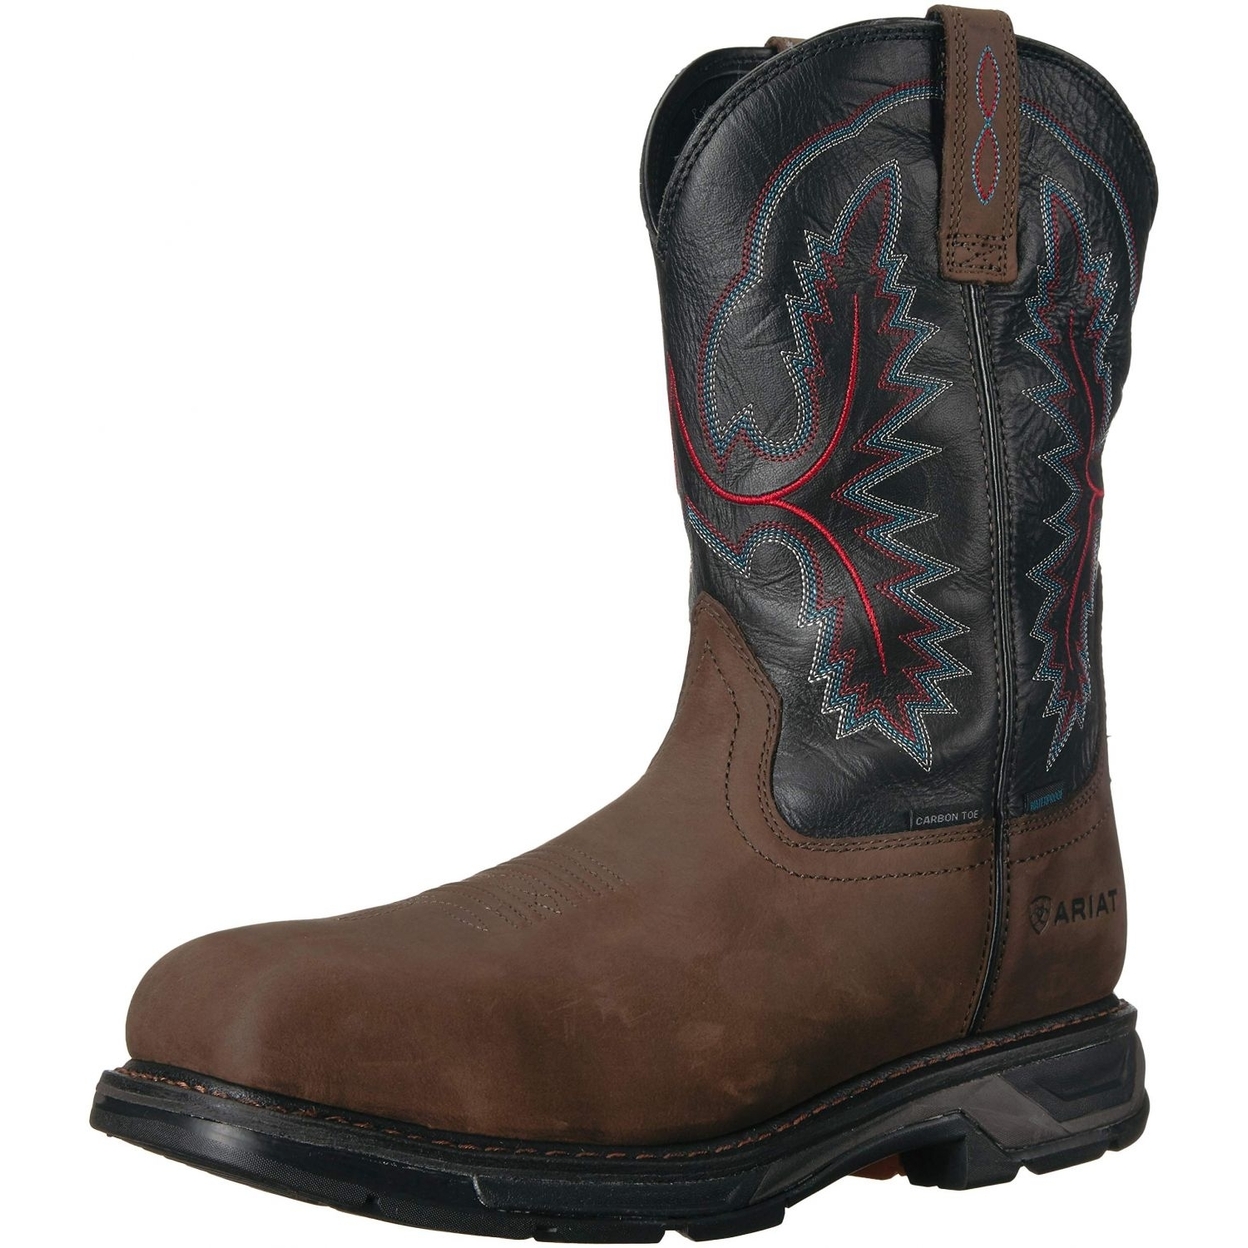 Ariat Work Men's Workhog XT H2O Carbon Toe Western Boot ONE SIZE BRK/ FOREST - BRK/ FOREST, 10.5-D